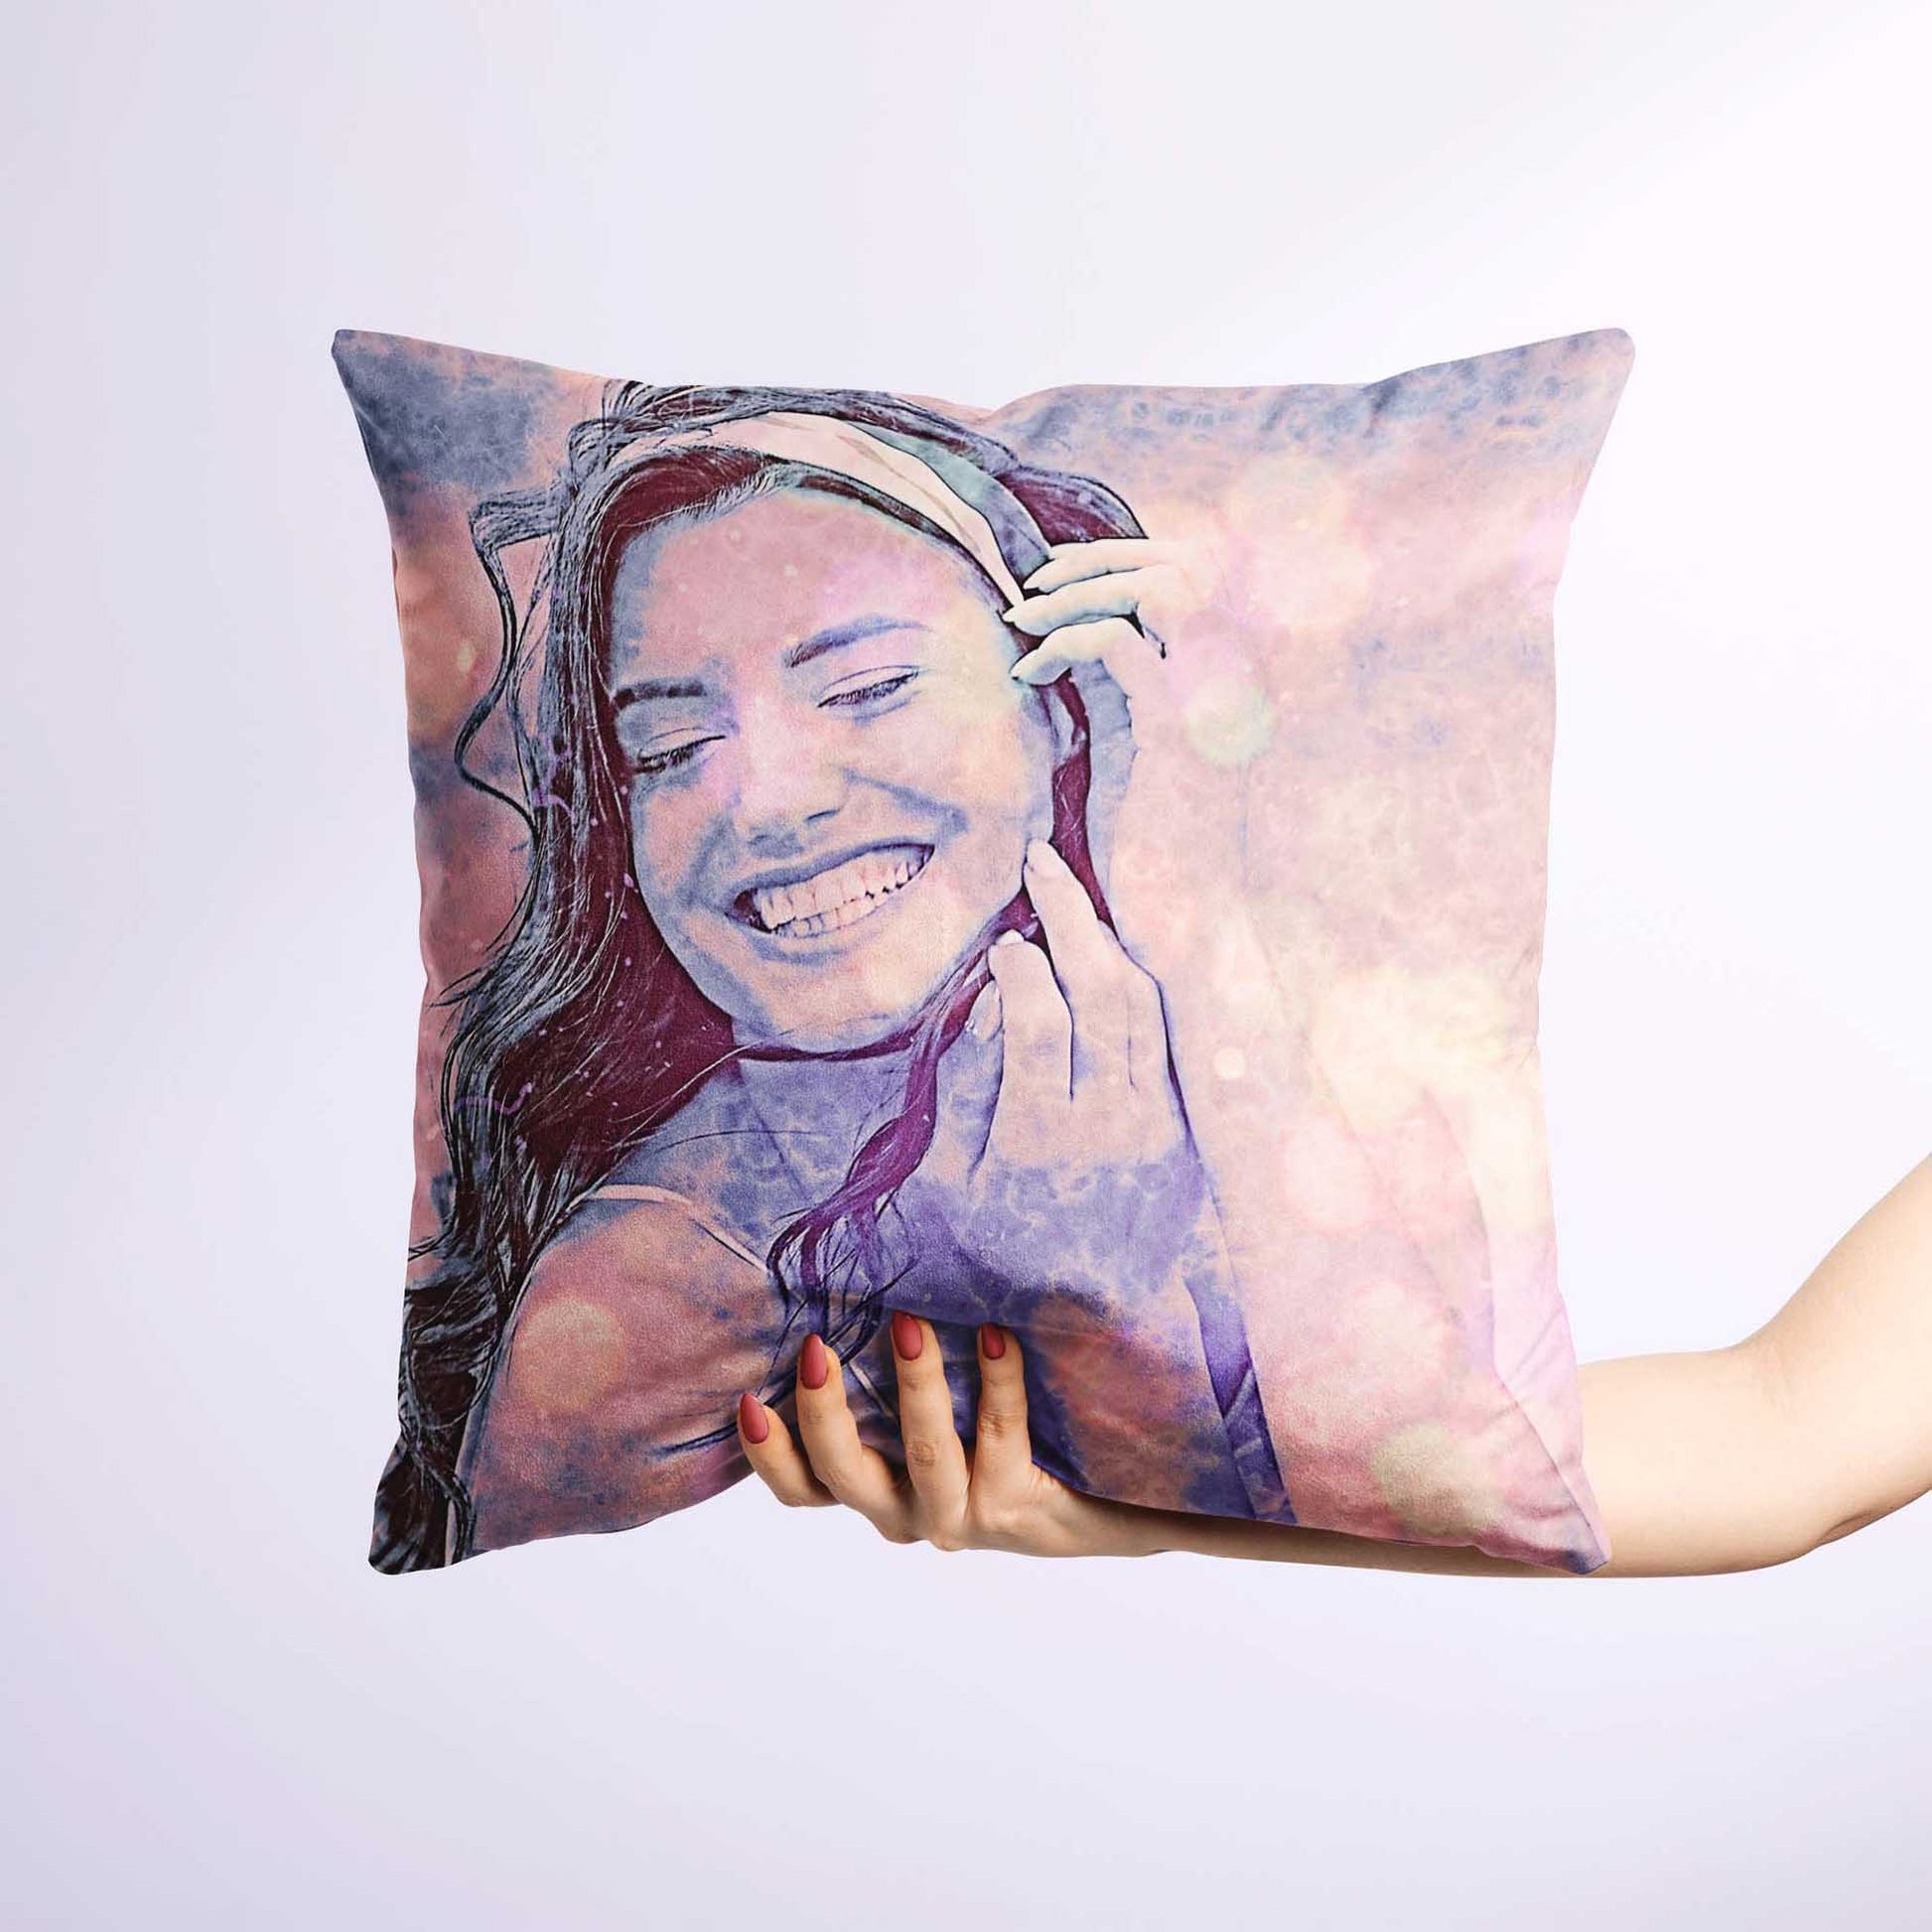 Experience the perfect blend of luxury and personalization with the Personalised Special Purple FX Cushion. This custom-made cushion is a unique and original piece for your home decor. With its vibrant and bright print